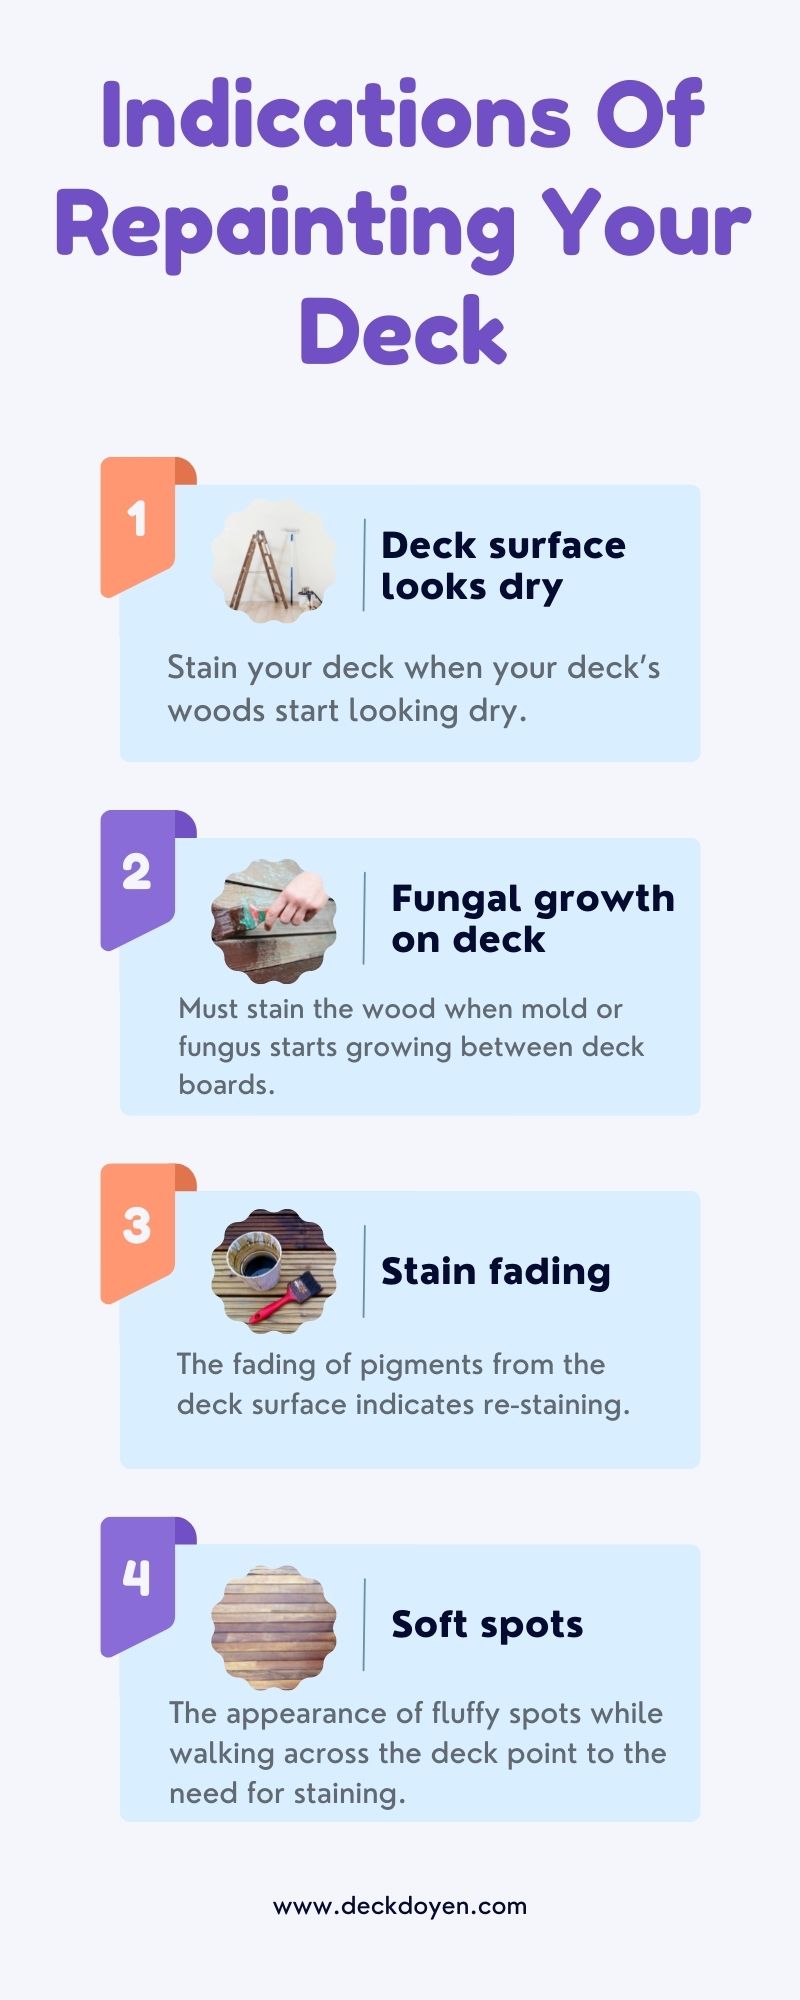 When To Restain Your Deck?